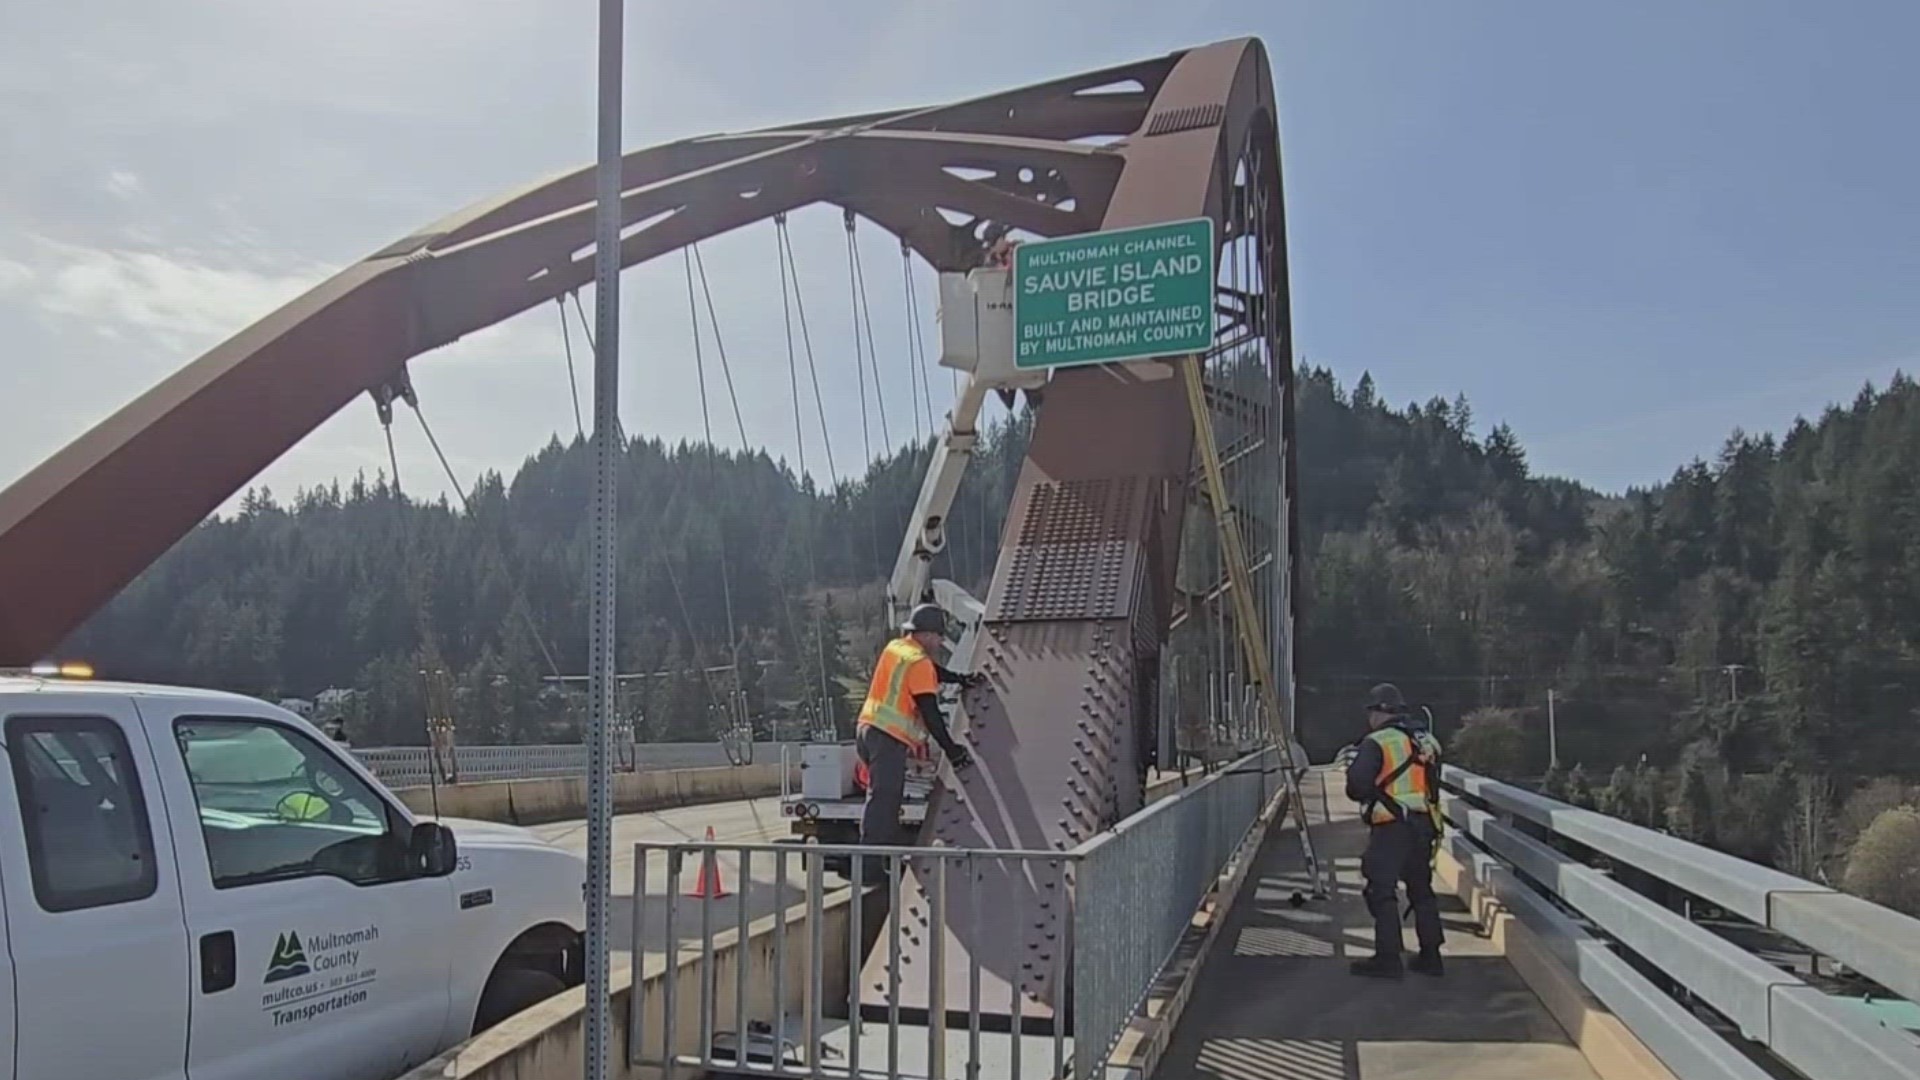 Signs were taken down last month and replaced with ones bearing the bridge's new name, Wapato Bridge. An auction for one of the old signs will be held on May 18.